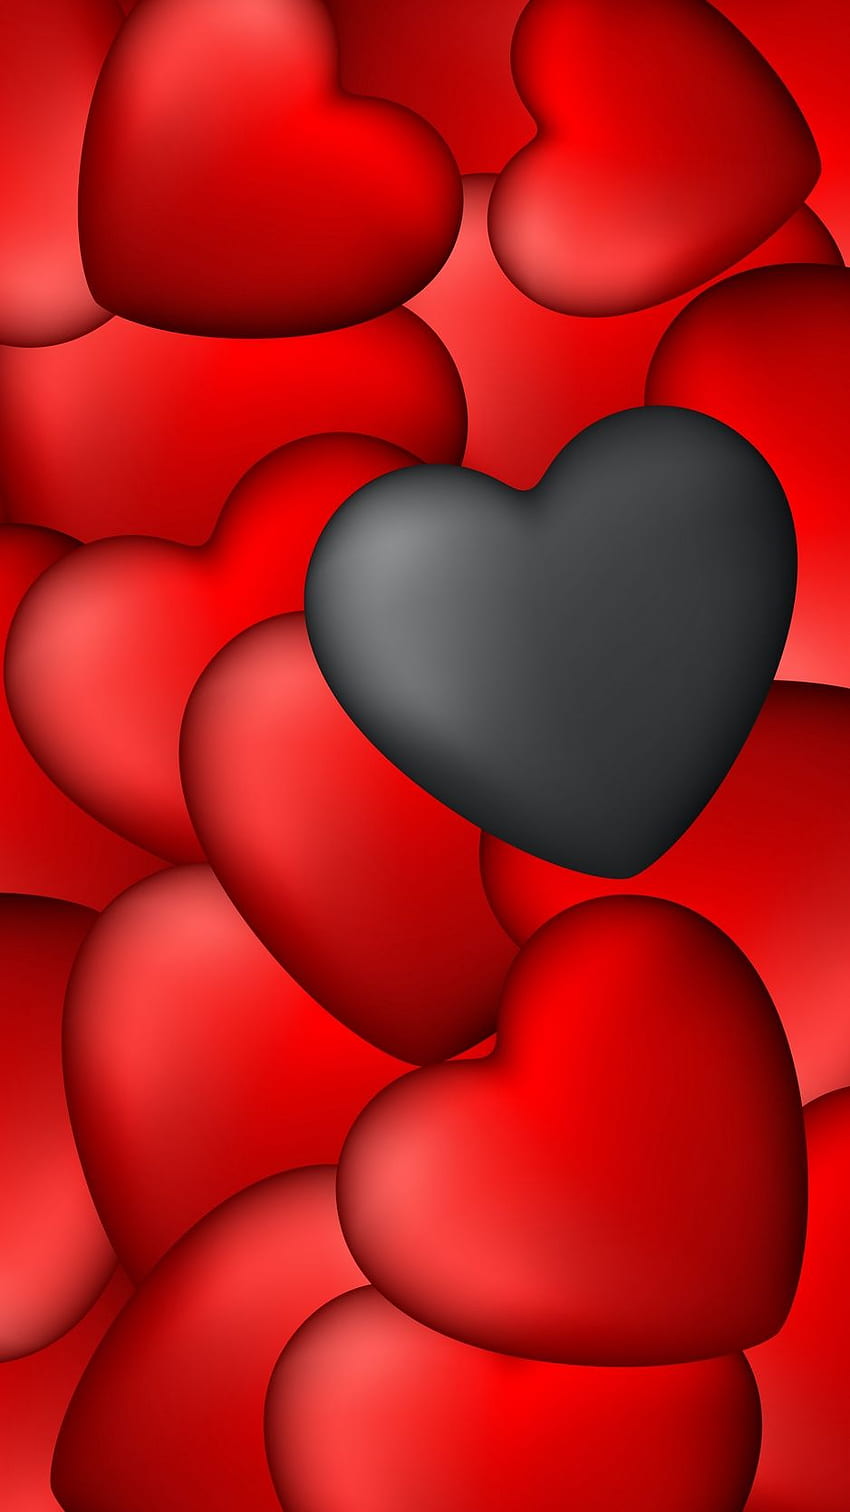  heart red black wall blurry aesthetic pinterest  Red and black  wallpaper Valentines wallpaper Dark red wallpaper